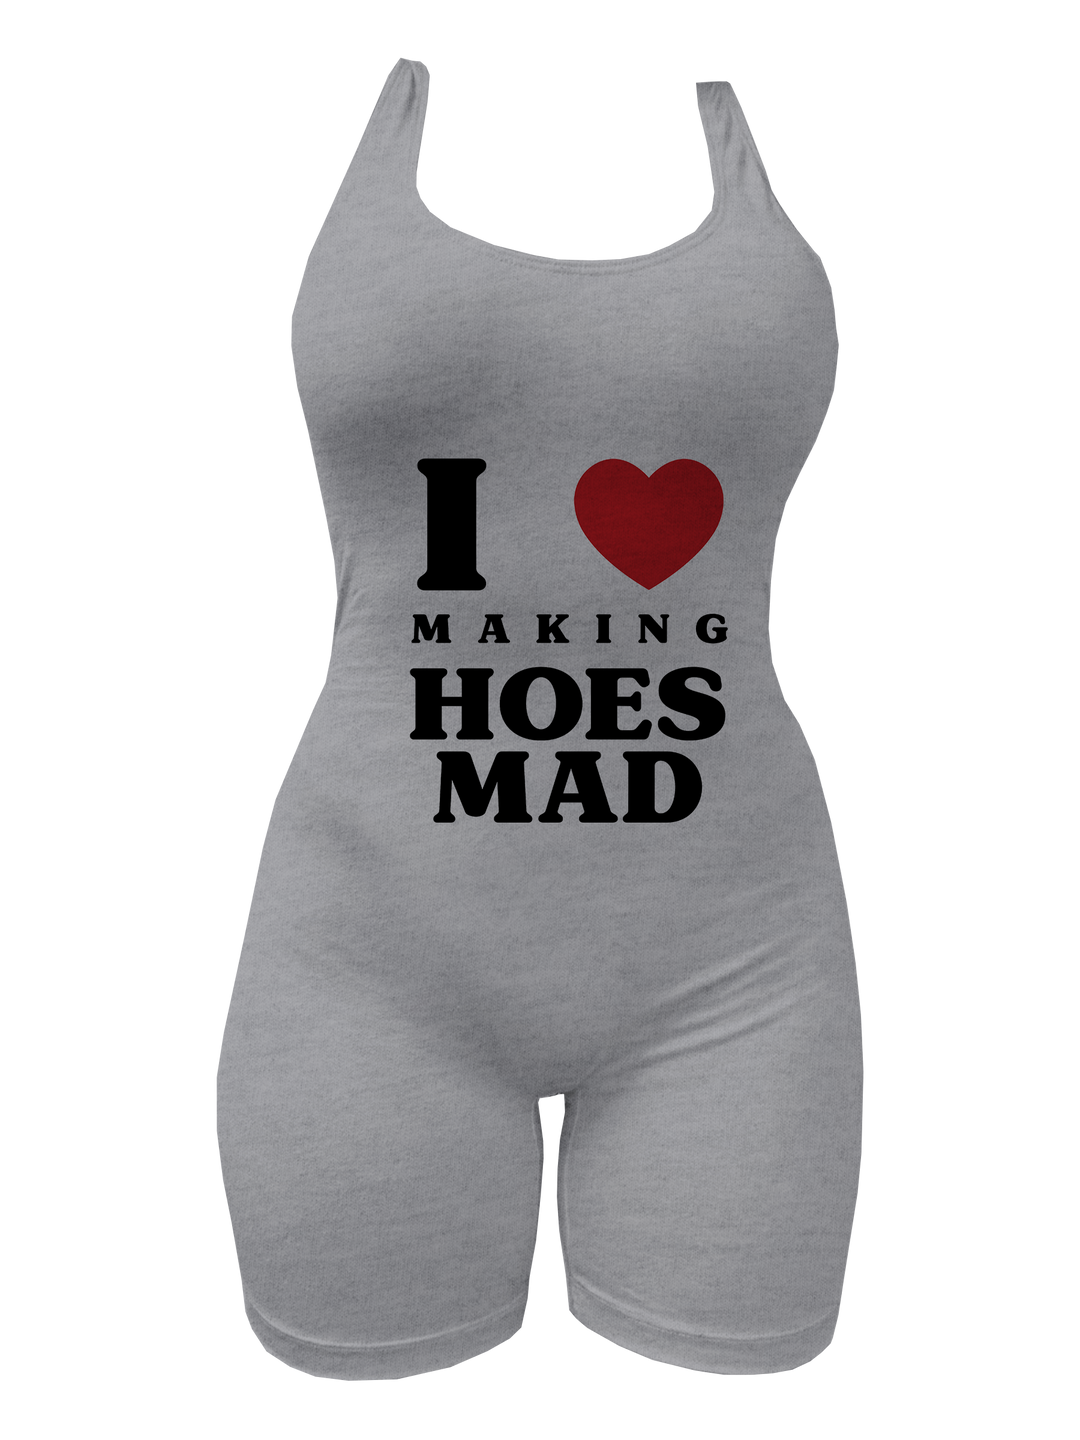 I LOVE MAKING HOESMAD JUMPSUIT- HEATHER GREY